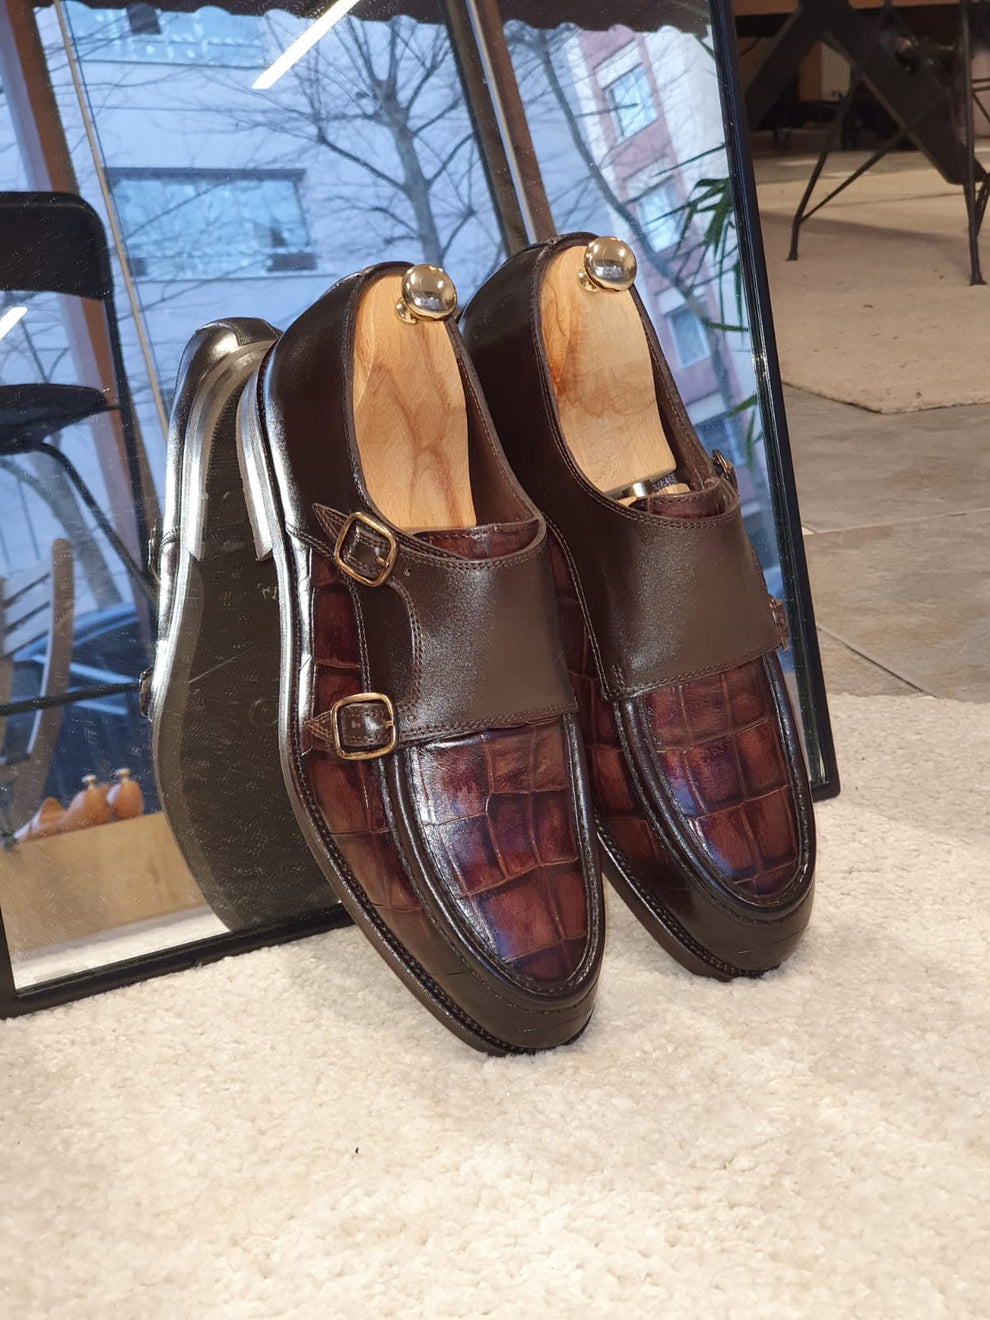 Montreal Brown Monk Strap Loafers – BRABION